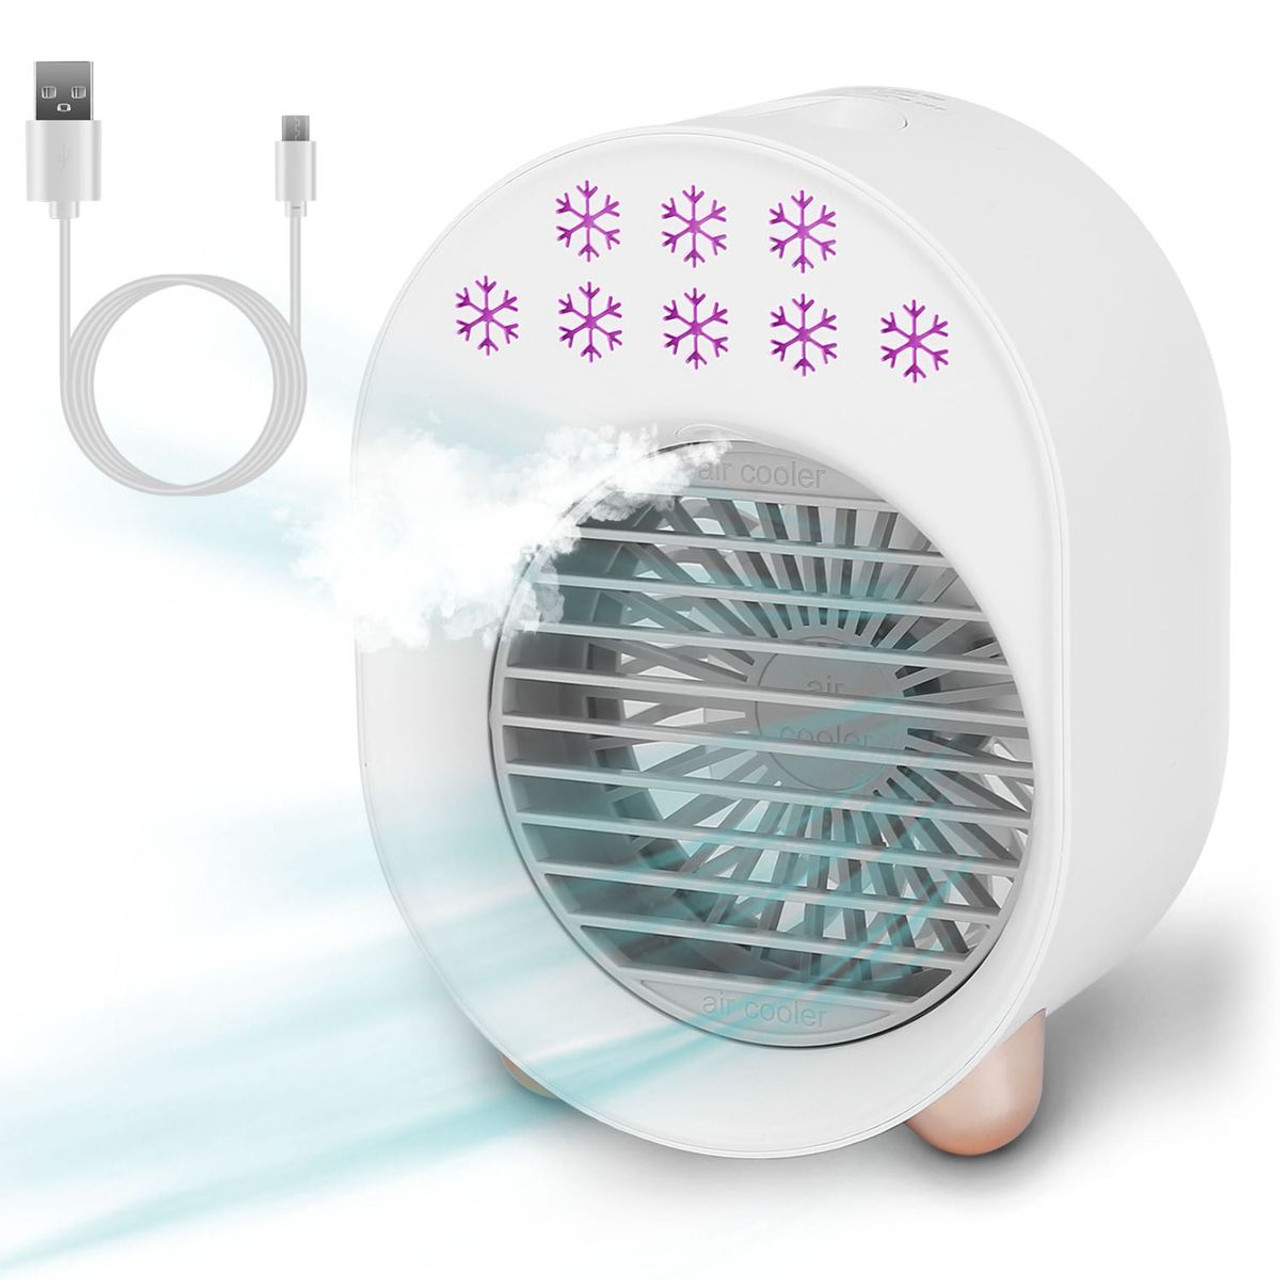 4-in-1 Mini Desktop Air Conditioner Fan, USB Rechargeable product image